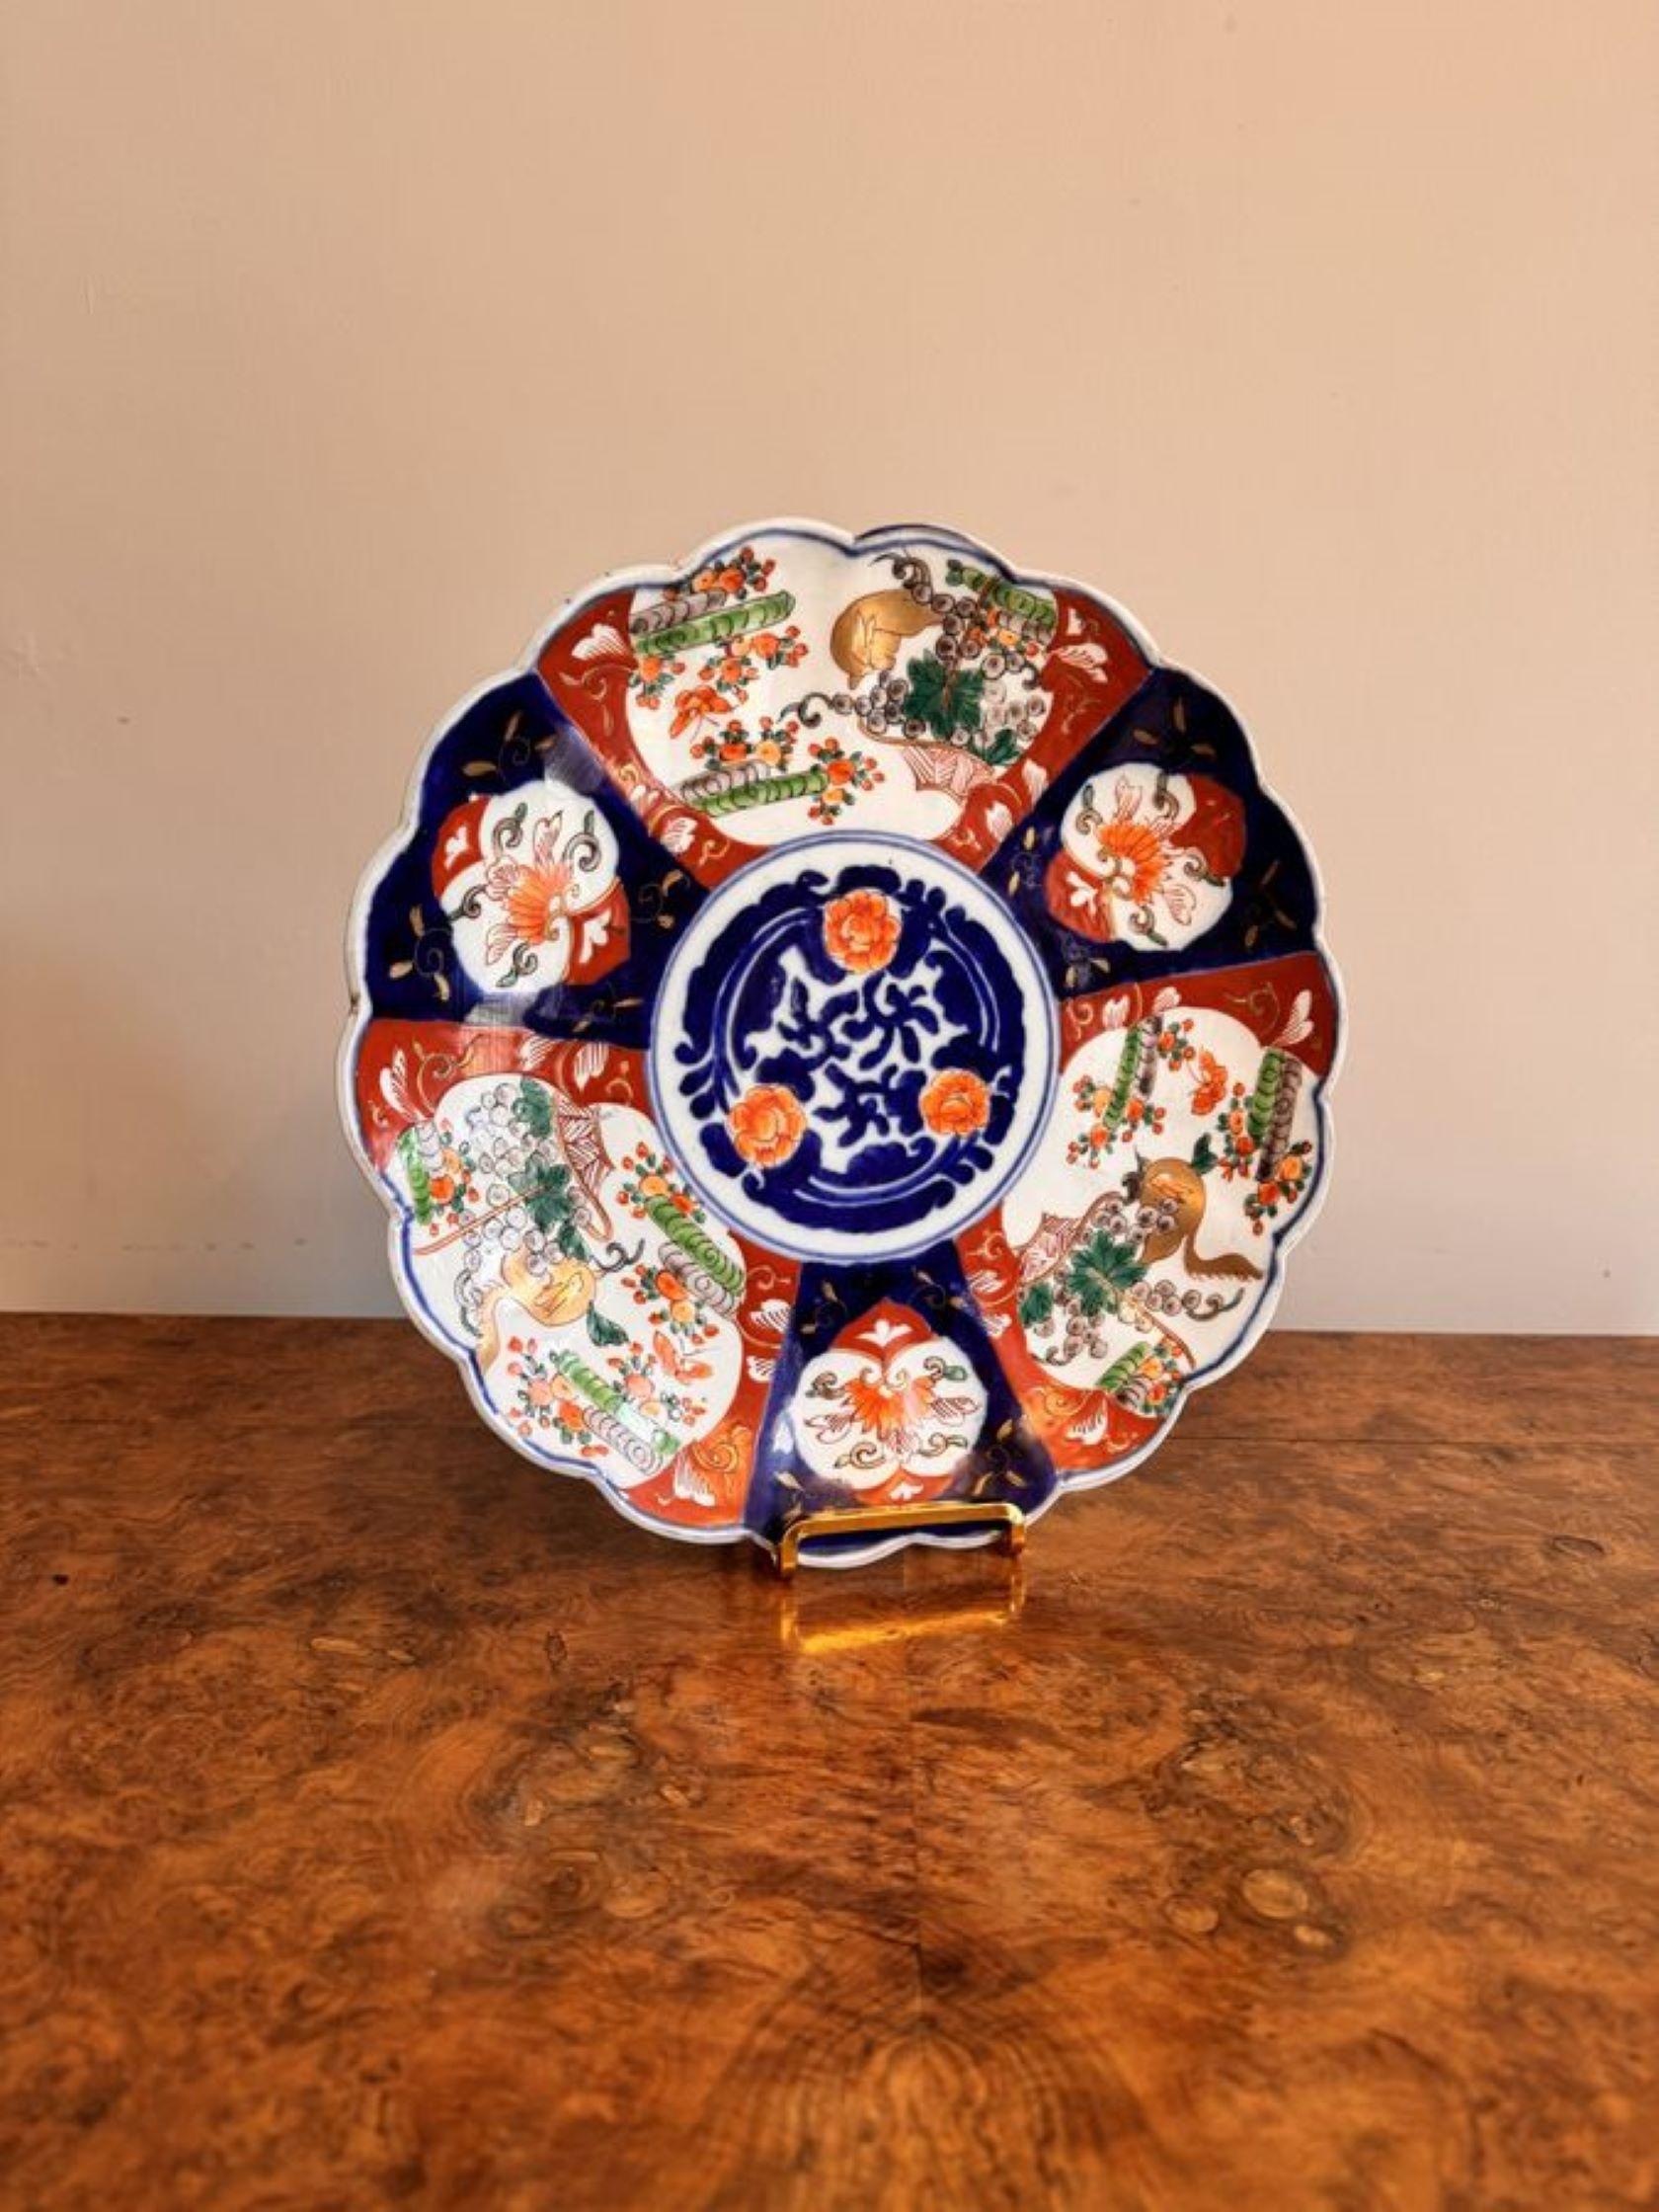 Quality antique Japanese imari plate having a quality Japanese imari plate with flowers to the centre surrounded by panels of hand painted flowers, trees, scrolls and birds in stunning red, blue, gold, green and white colours.

D. 1900